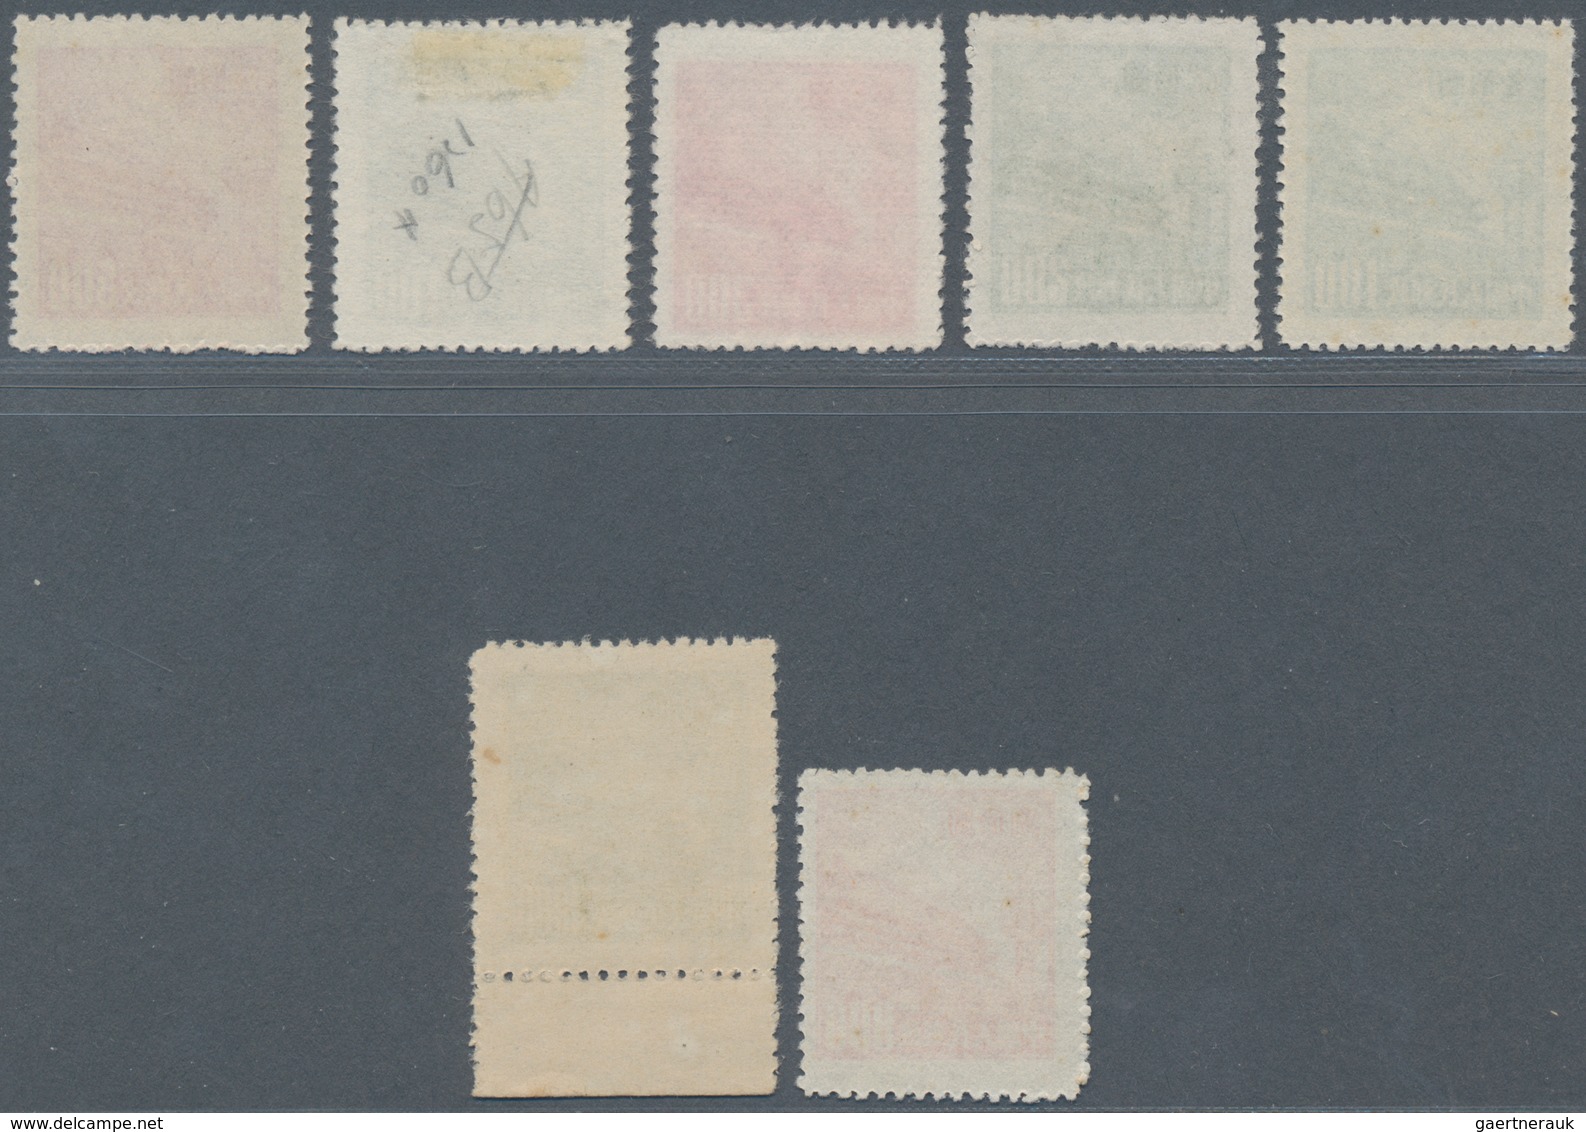 China - Volksrepublik: 1950, Gate Of Heavenly Peace Definitives, Third Issue (R3), Complete Set Of 7 - Covers & Documents